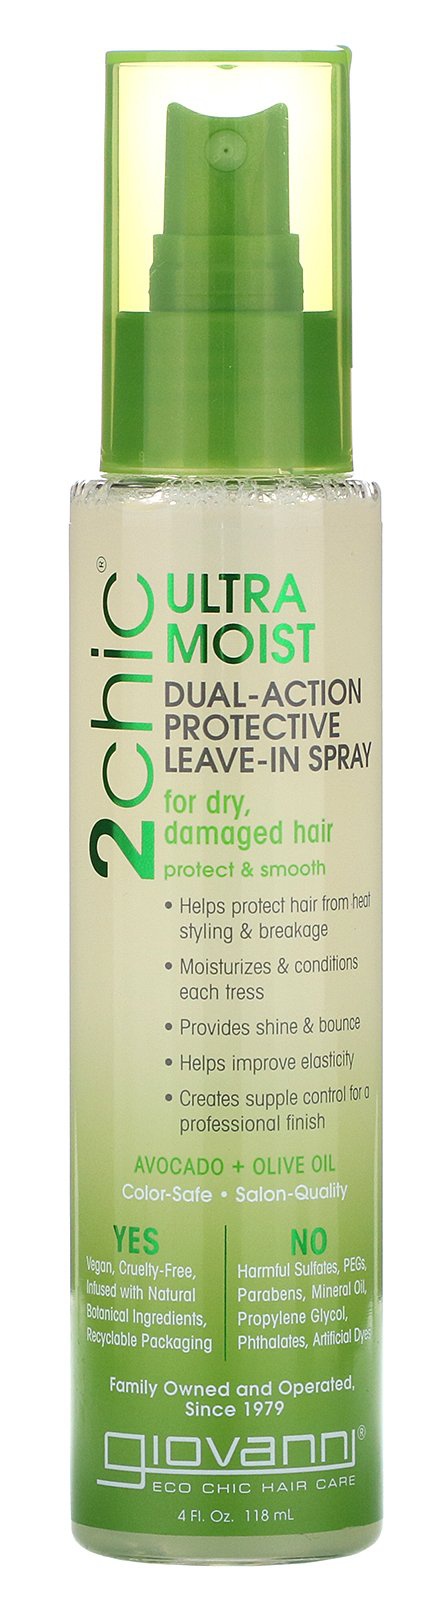 Giovanni 2chic® Ultra-moist Dual-action Protective Leave-in Spray